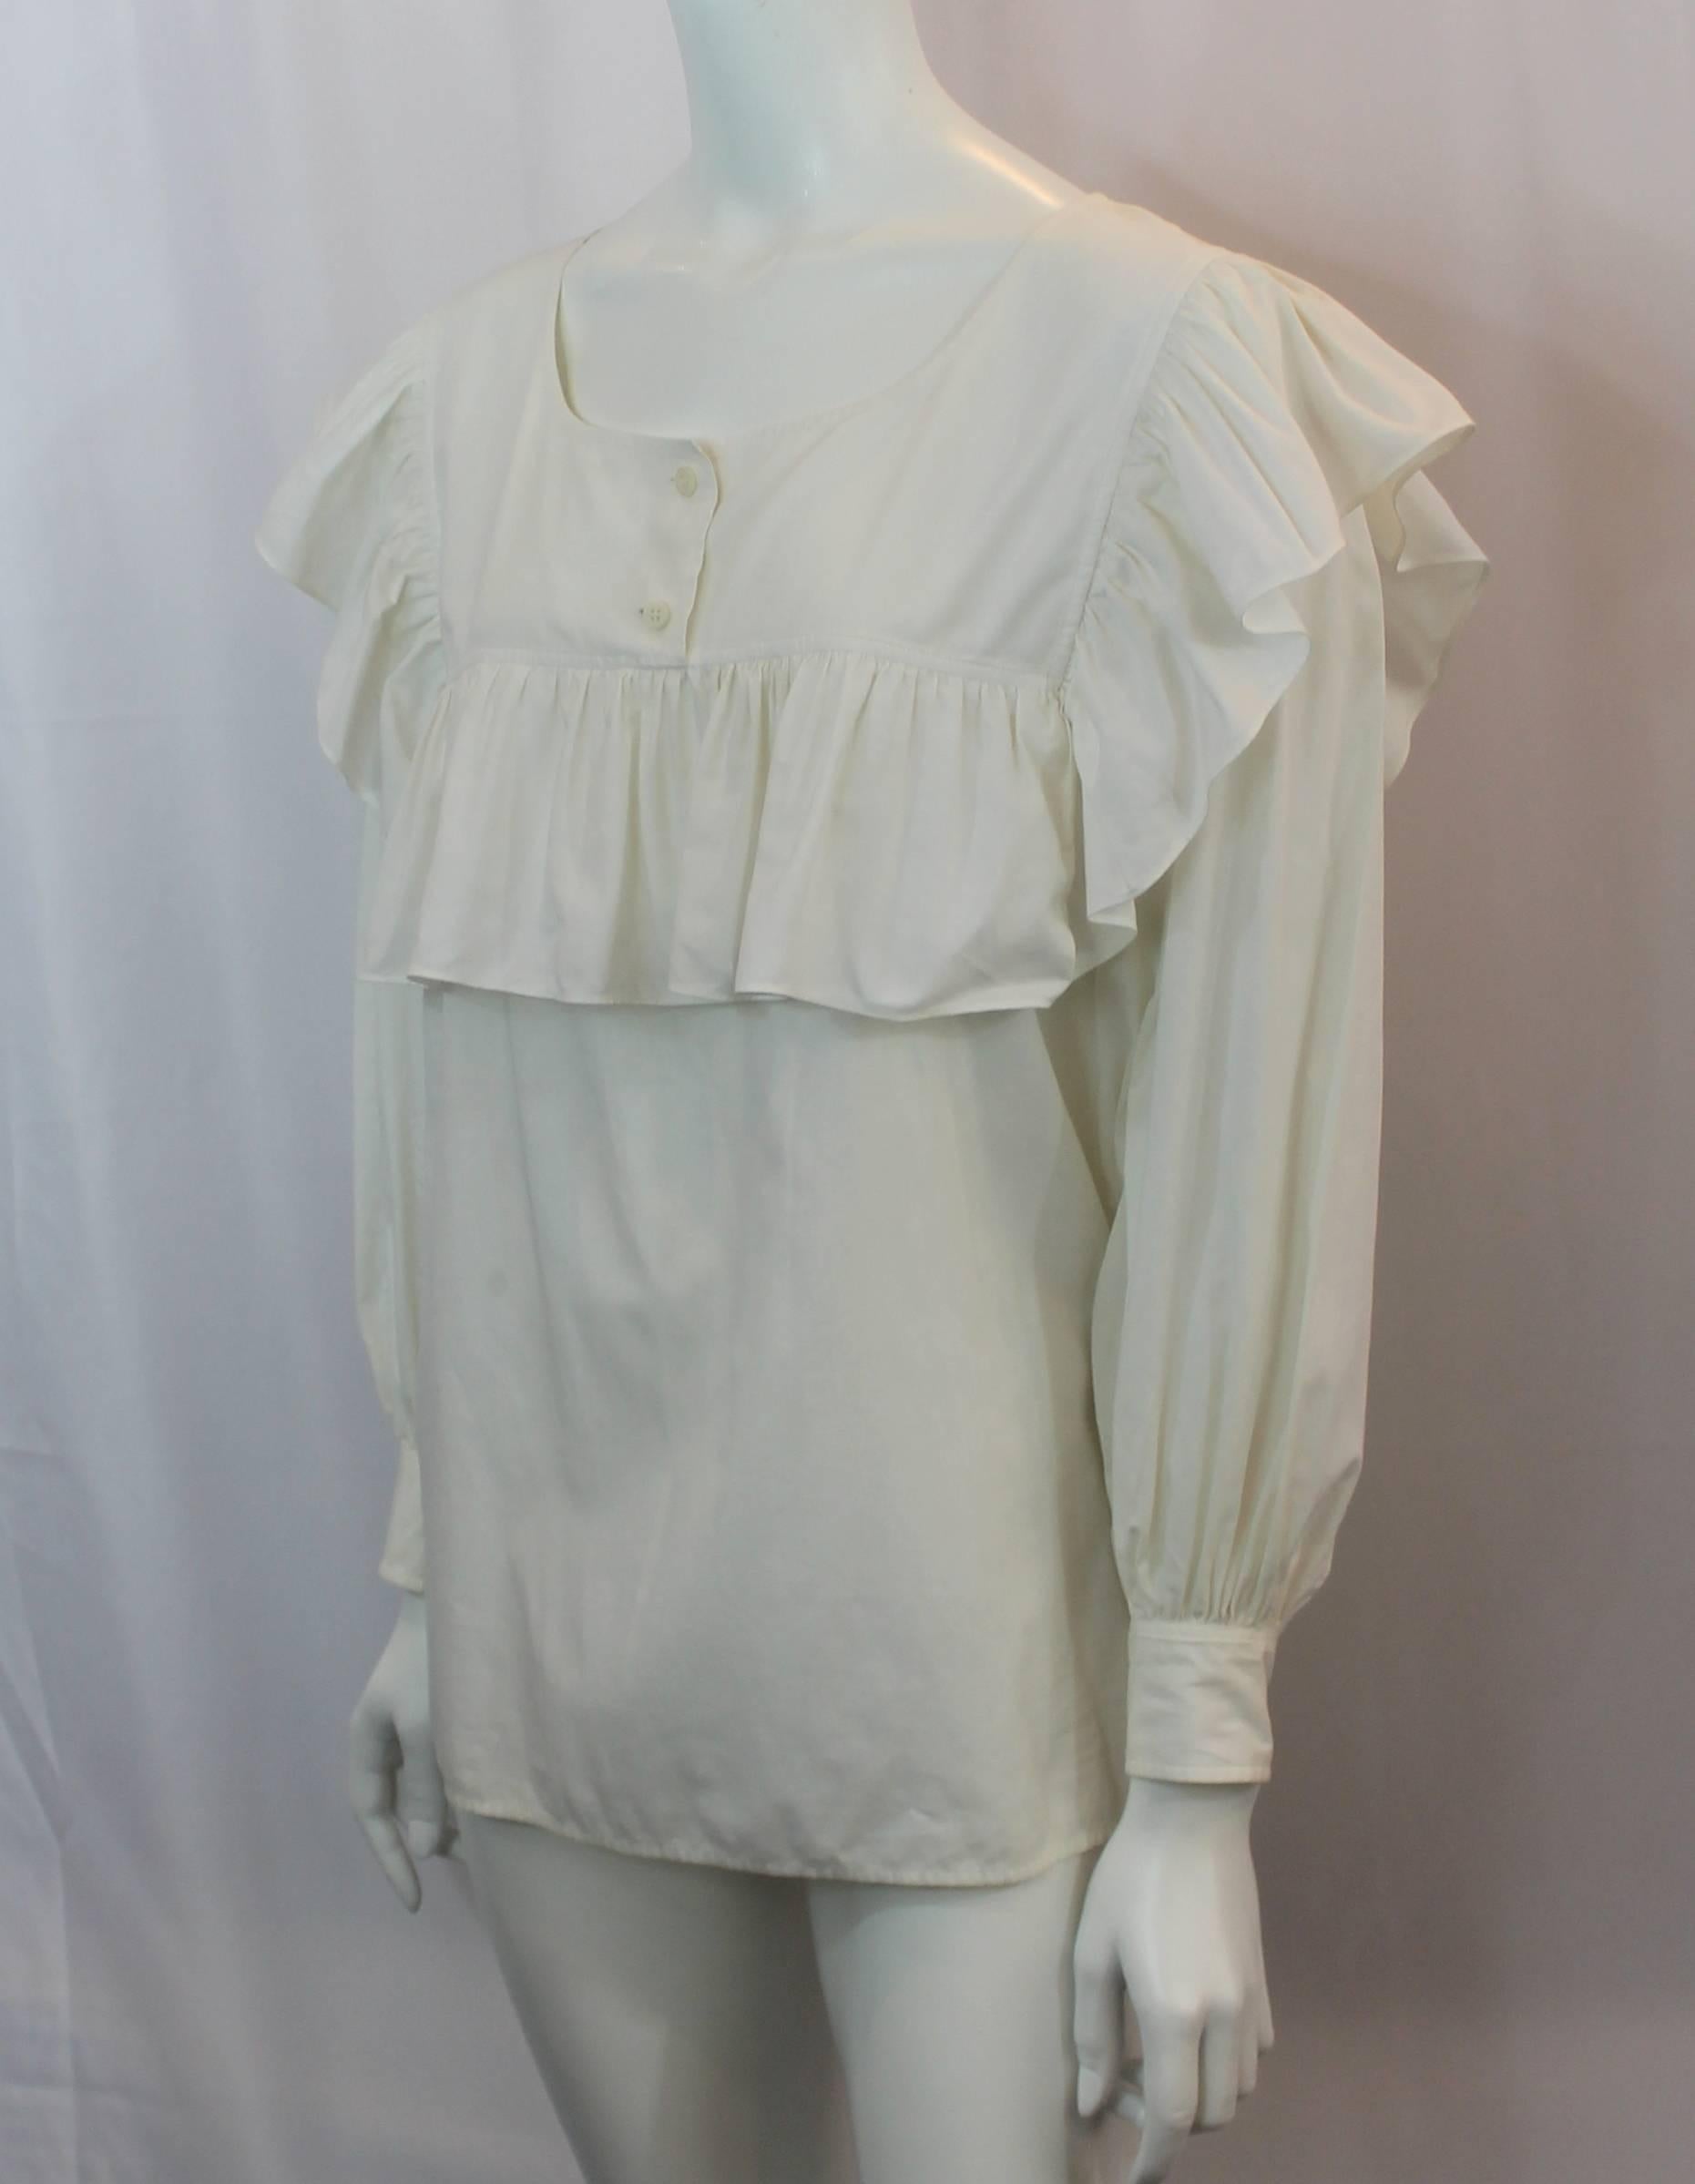 Yves Saint Laurent Off White Cotton Peasant Top - M - 1960's. This top is in very good vinatage condition with wear light for its age, with the exception of 2 small faint marks on the upper back shown in image 6. The top features a loose style, a